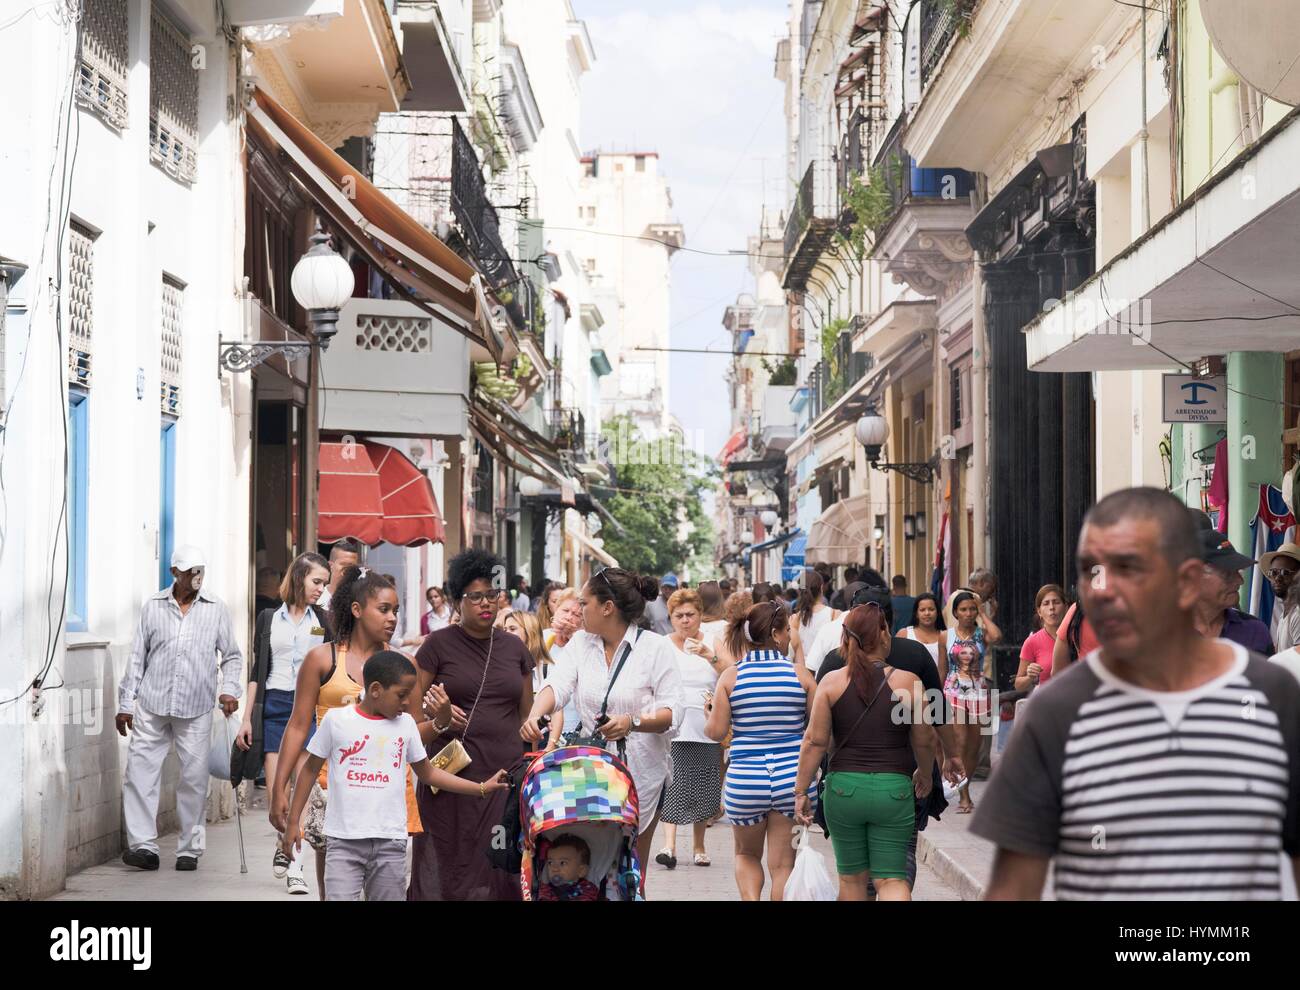 Crowded street with tourists, shoppers and local travellers at Calle Obispo (Bishop Street), Old Havana (La Habana Vieja), Cuba Stock Photo